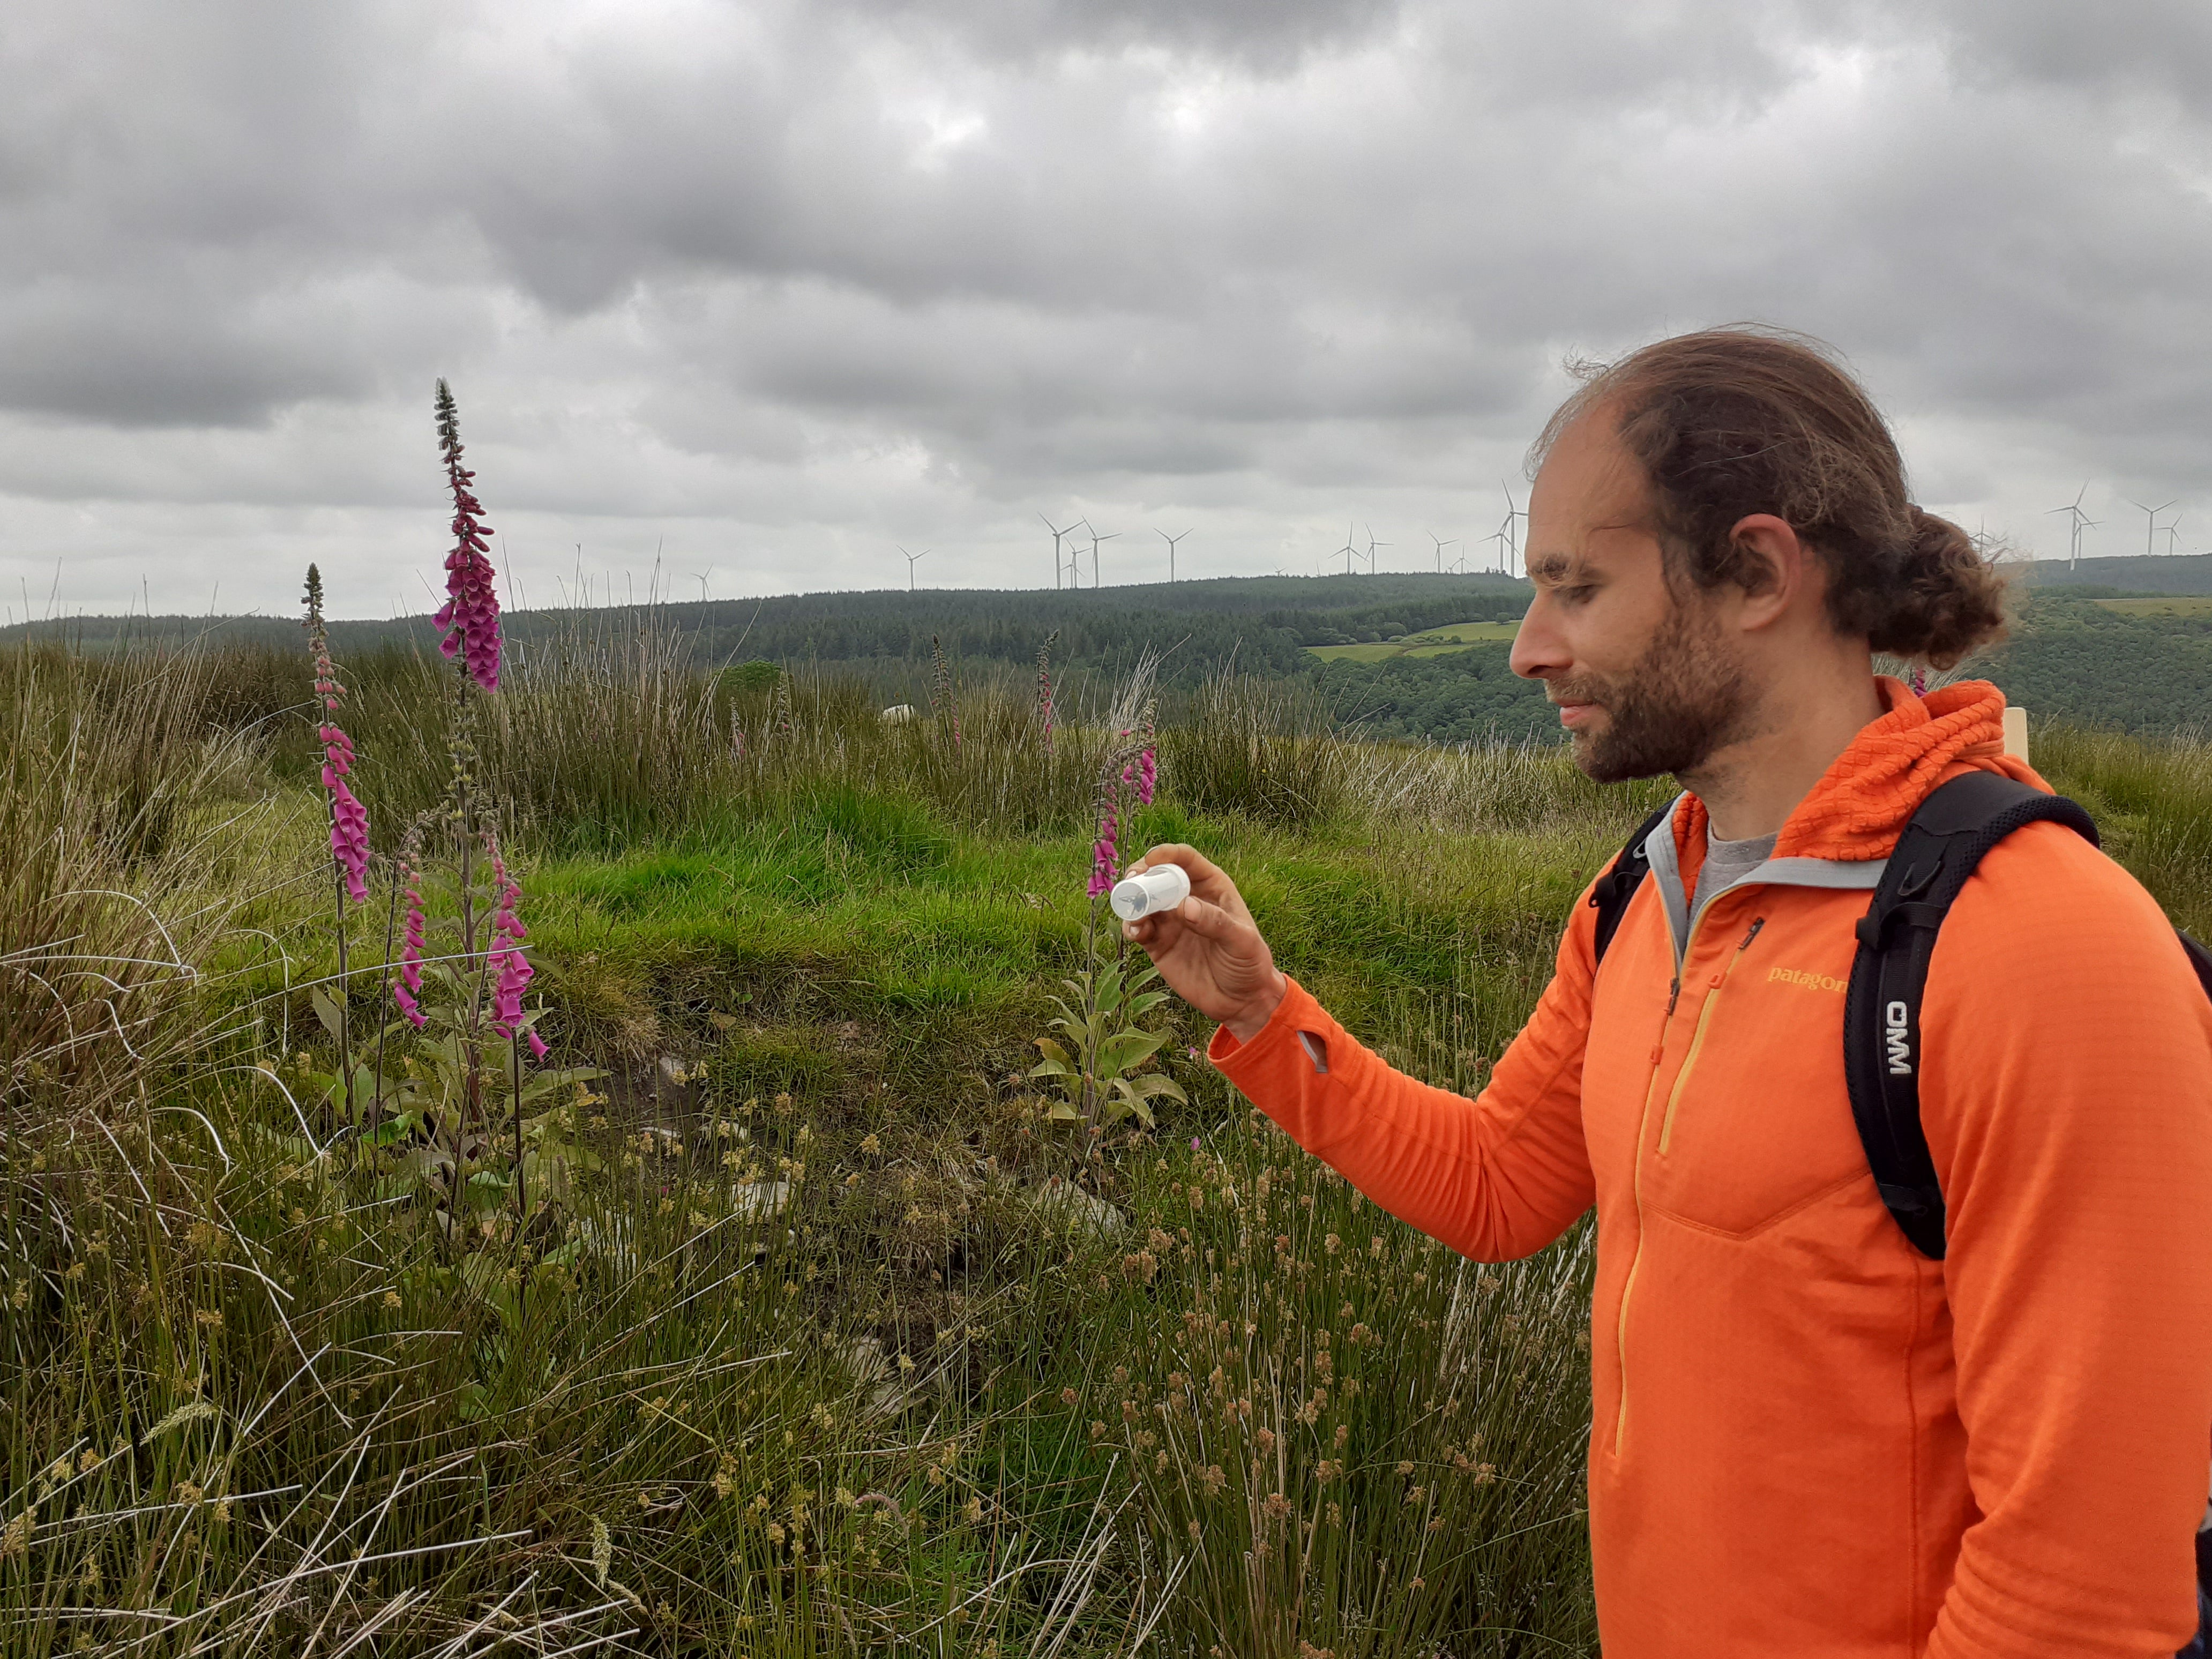 Lawrence Harris, Wales project development officer for the Bumblebee Conservation Trust